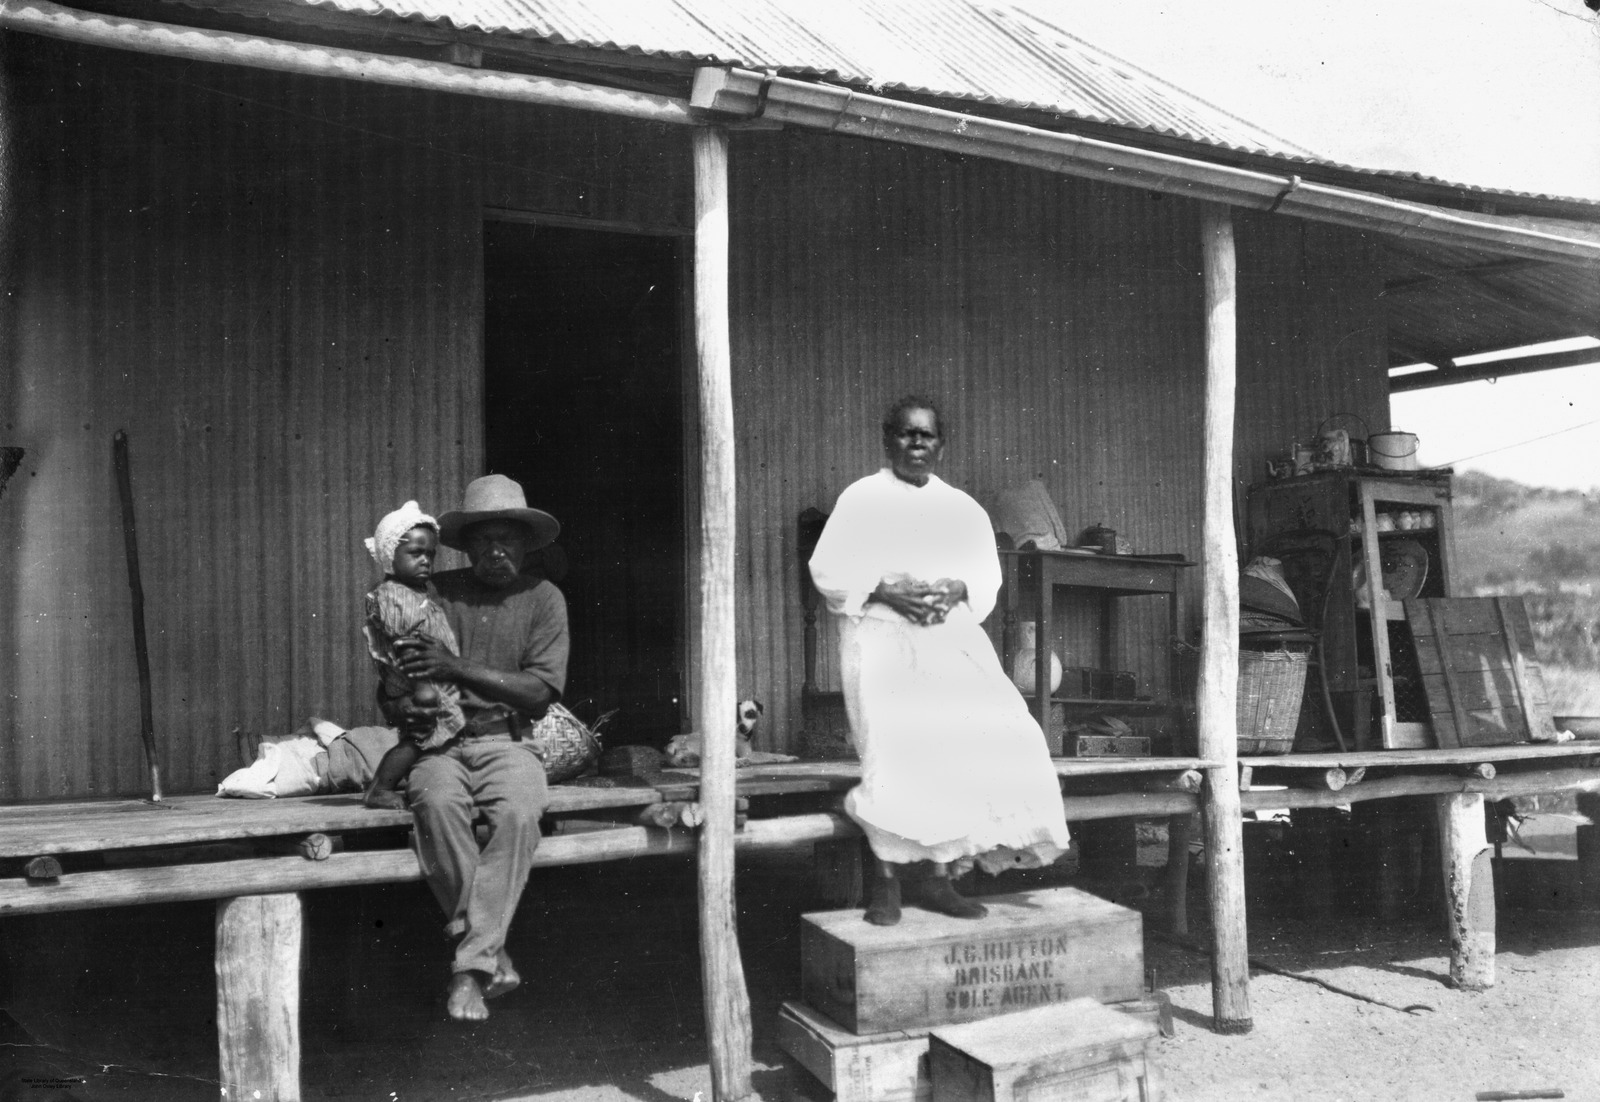 Black and white image of an Aboriginal man sitting holding a child an a woman standing in front of a building in North Queensland, ca.1920